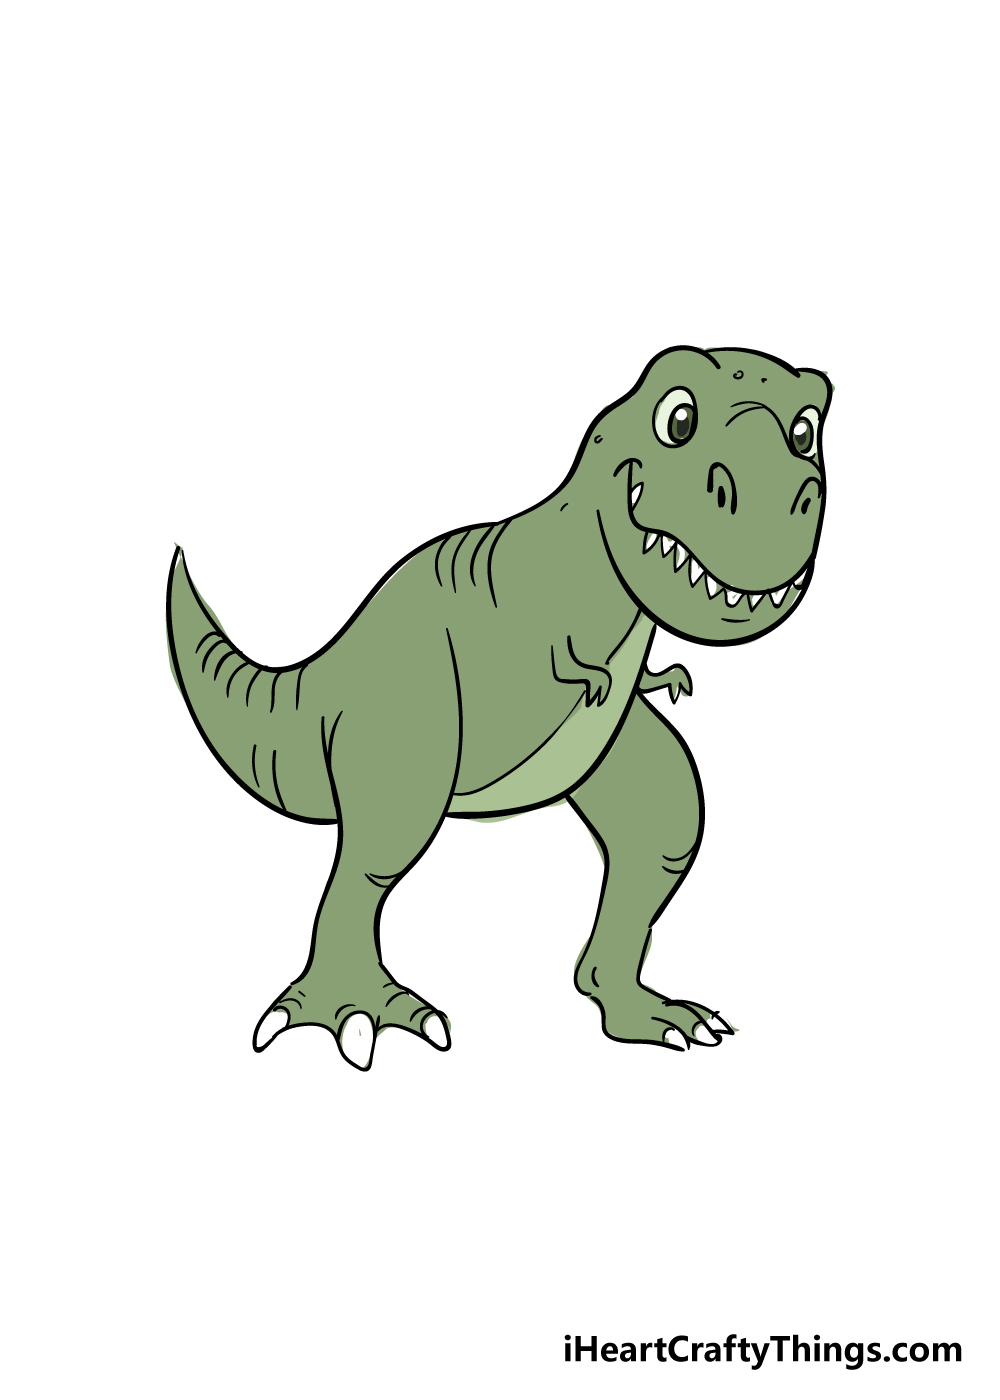 How to Draw A T-Rex – A Step by Step Guide